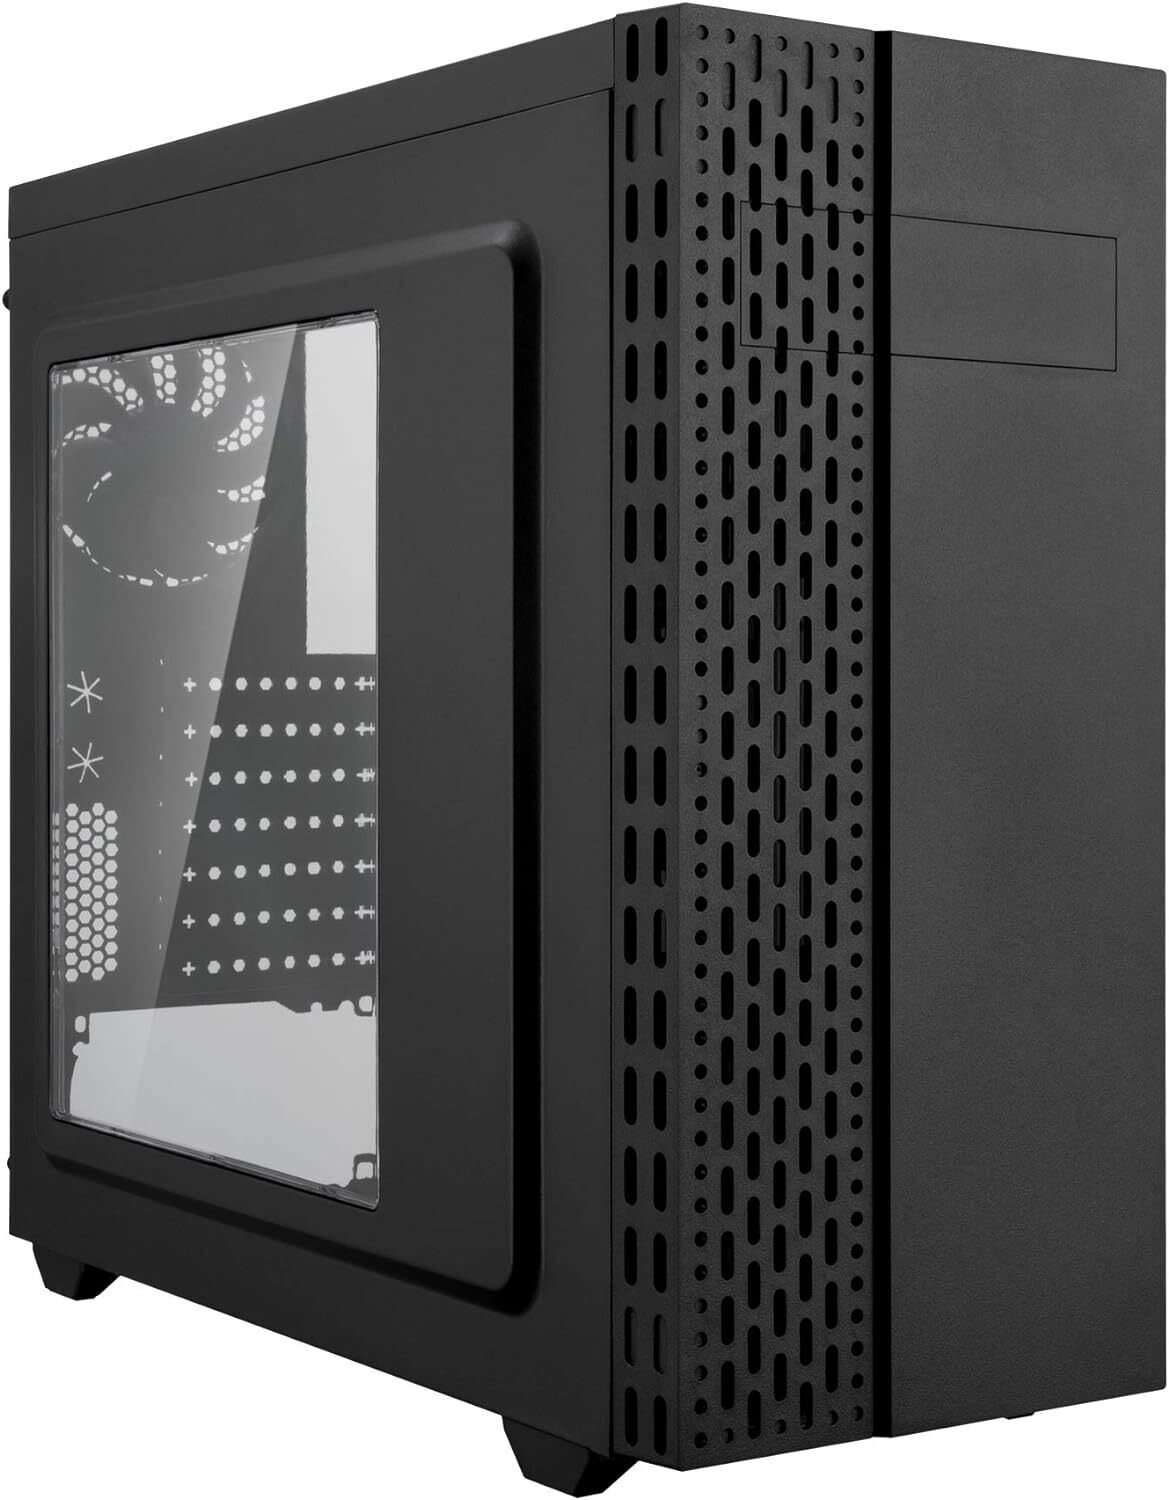 Rosewill Zircon T ATX Mid Tower Gaming PC Computer Case with Side Panel Window